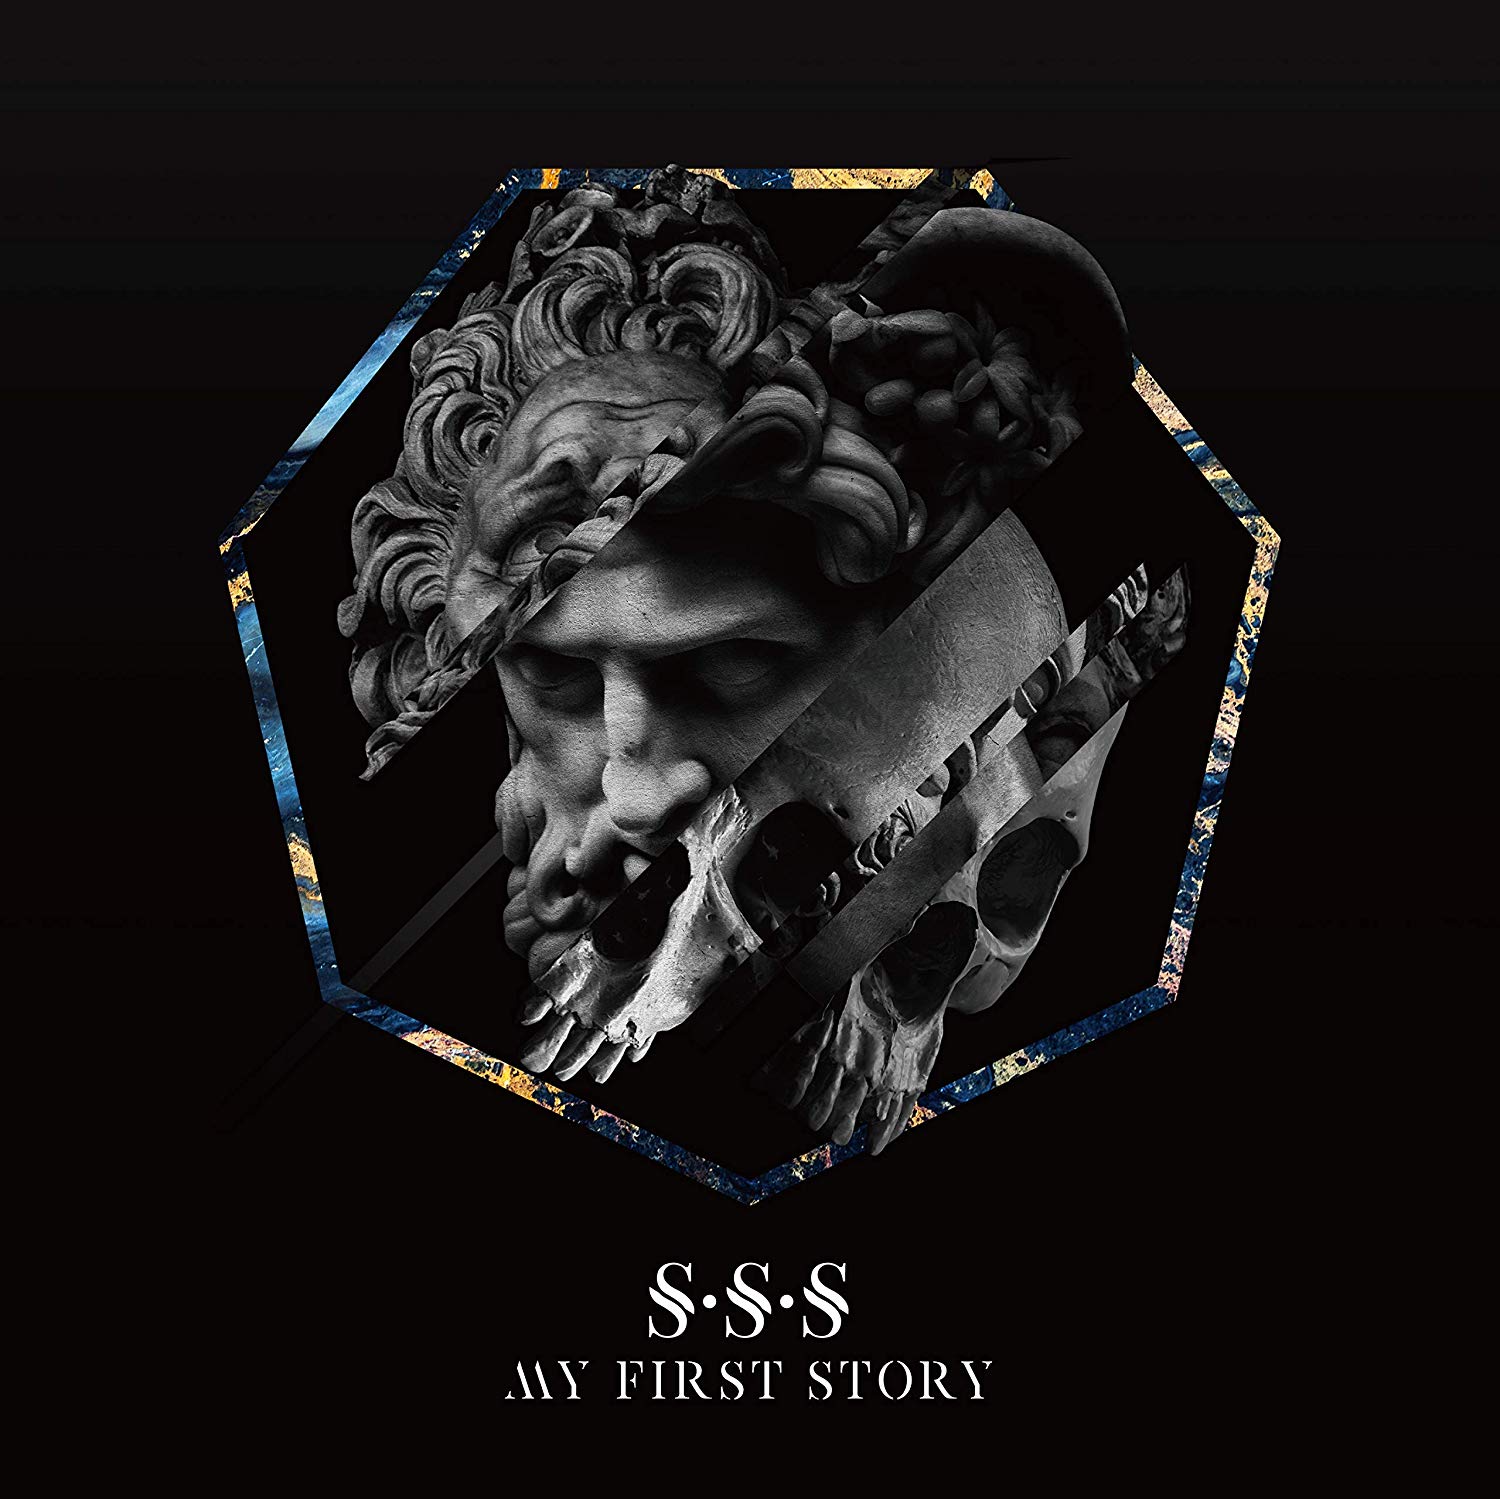 MY FIRST STORYのS･S･Sジャケット